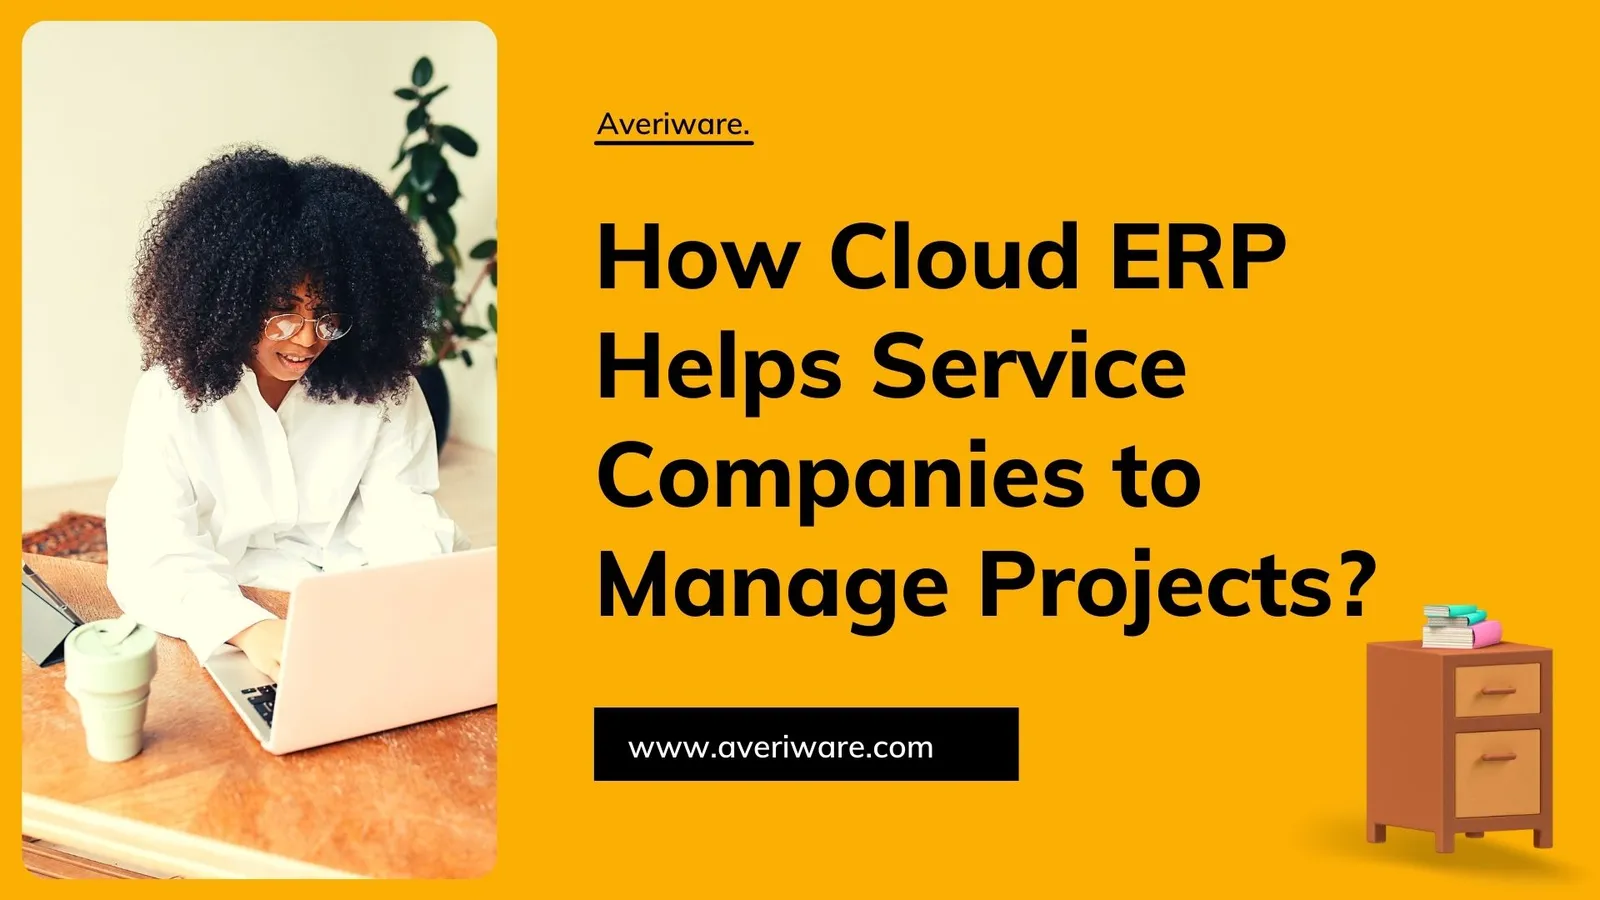 How Cloud ERP helps Service Companies to Manage Projects?